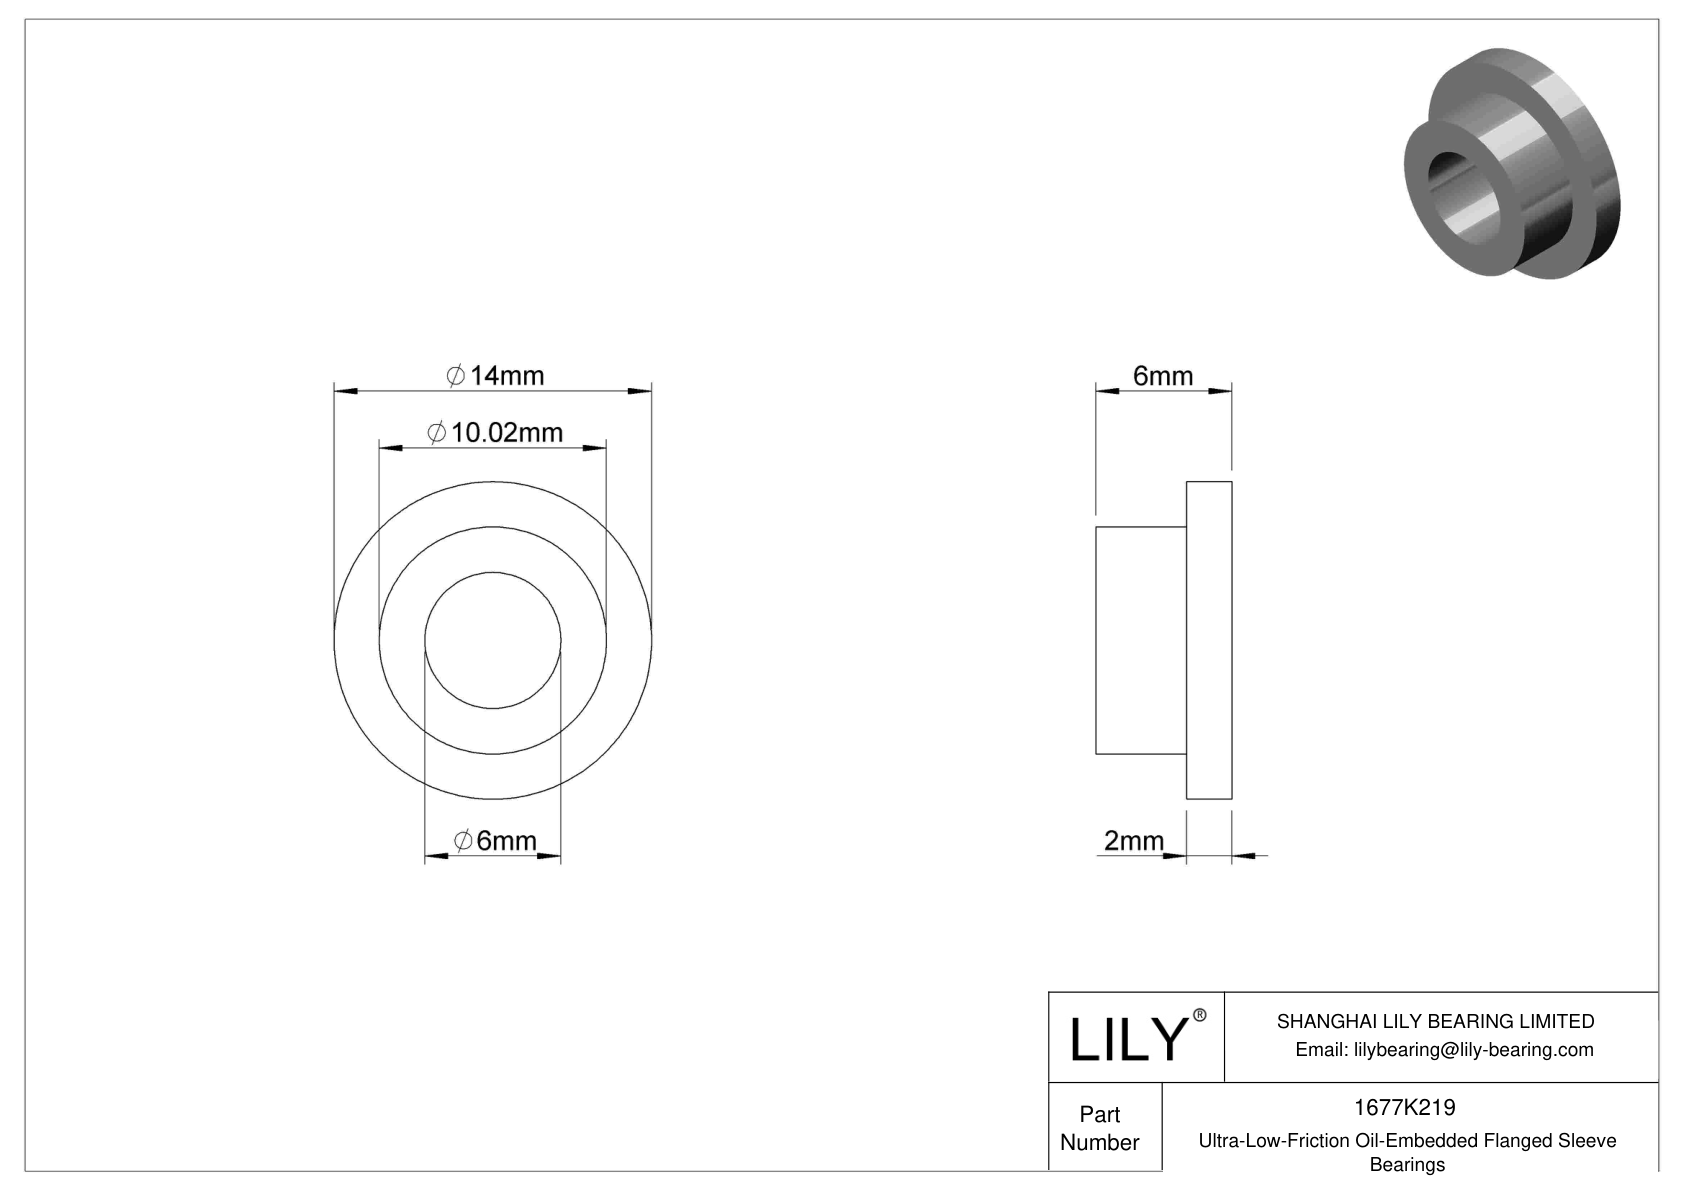 BGHHKCBJ Ultra-Low-Friction Oil-Embedded Flanged Sleeve Bearings cad drawing